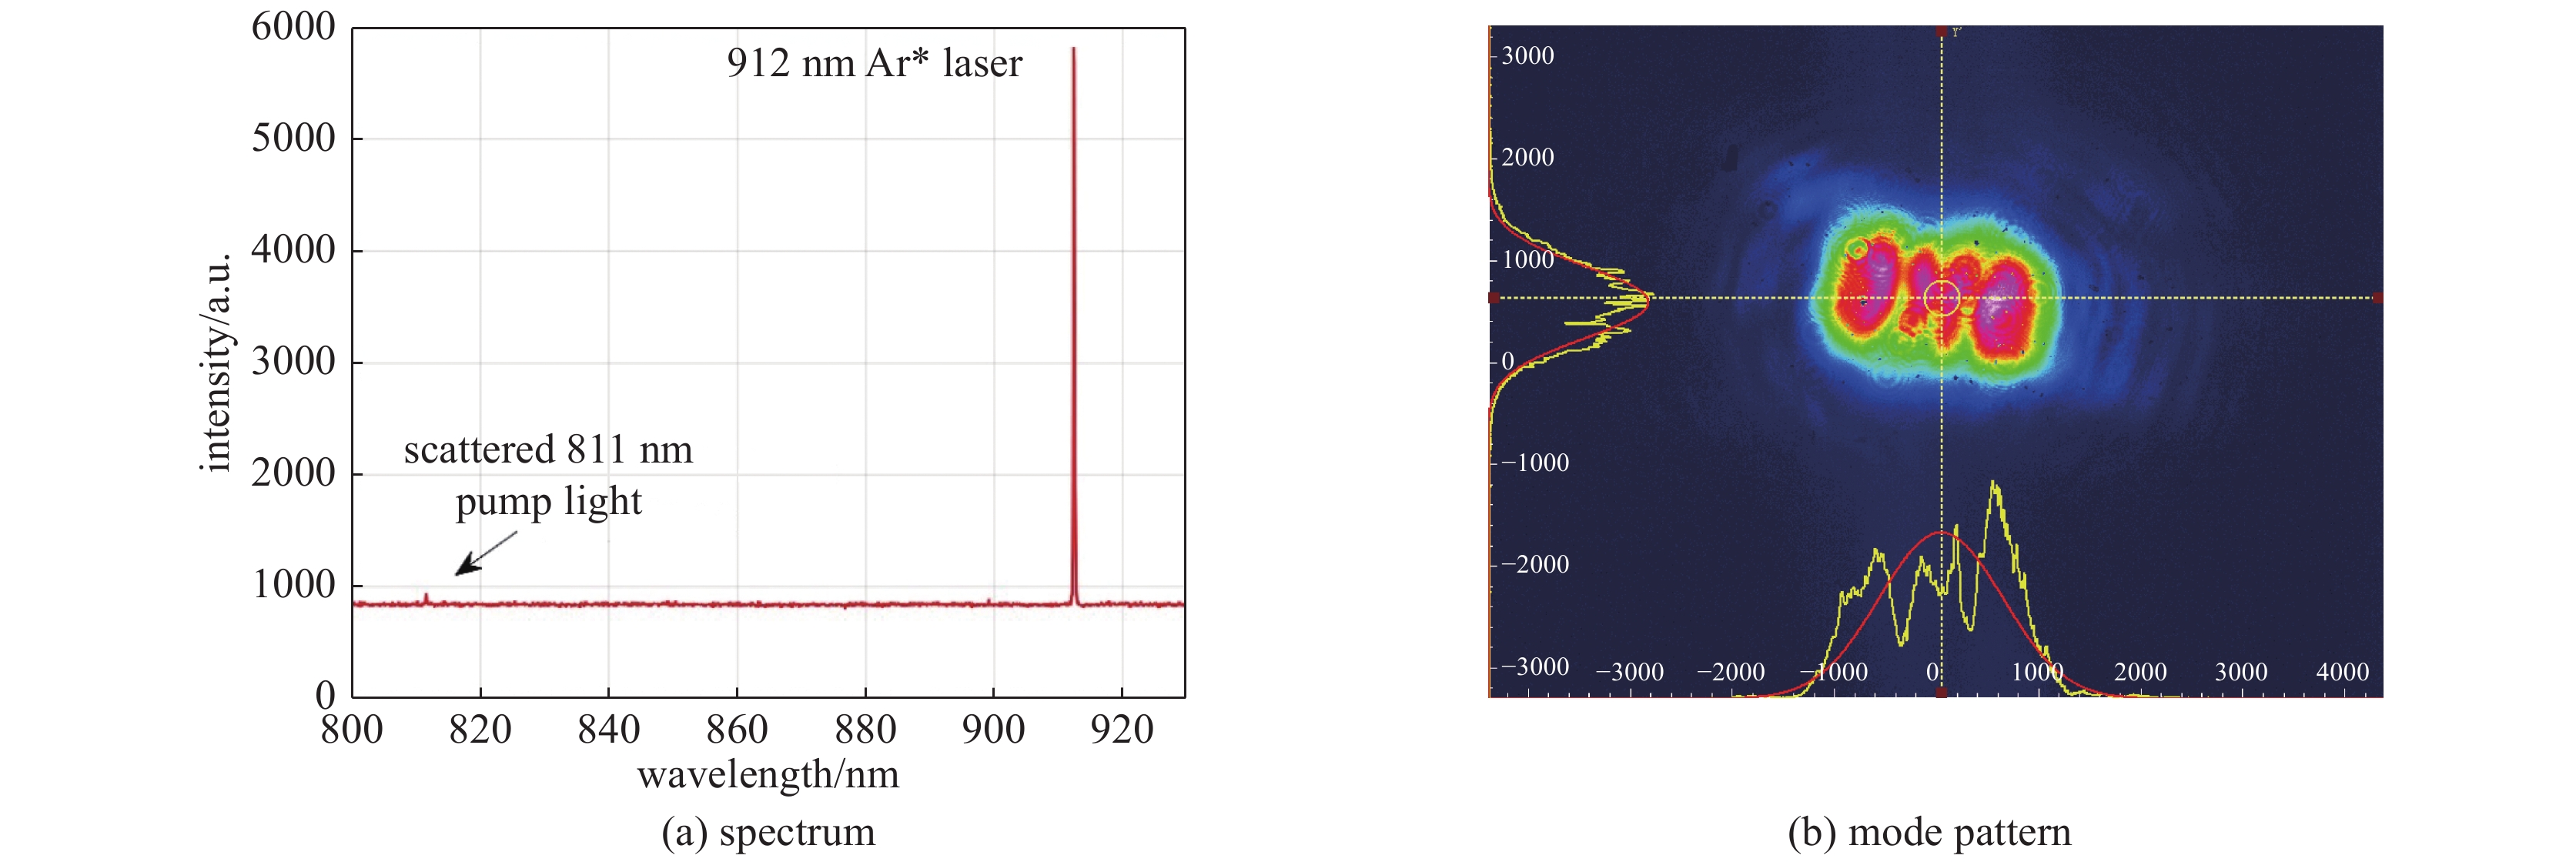 Spectrum and mode pattern of output laser